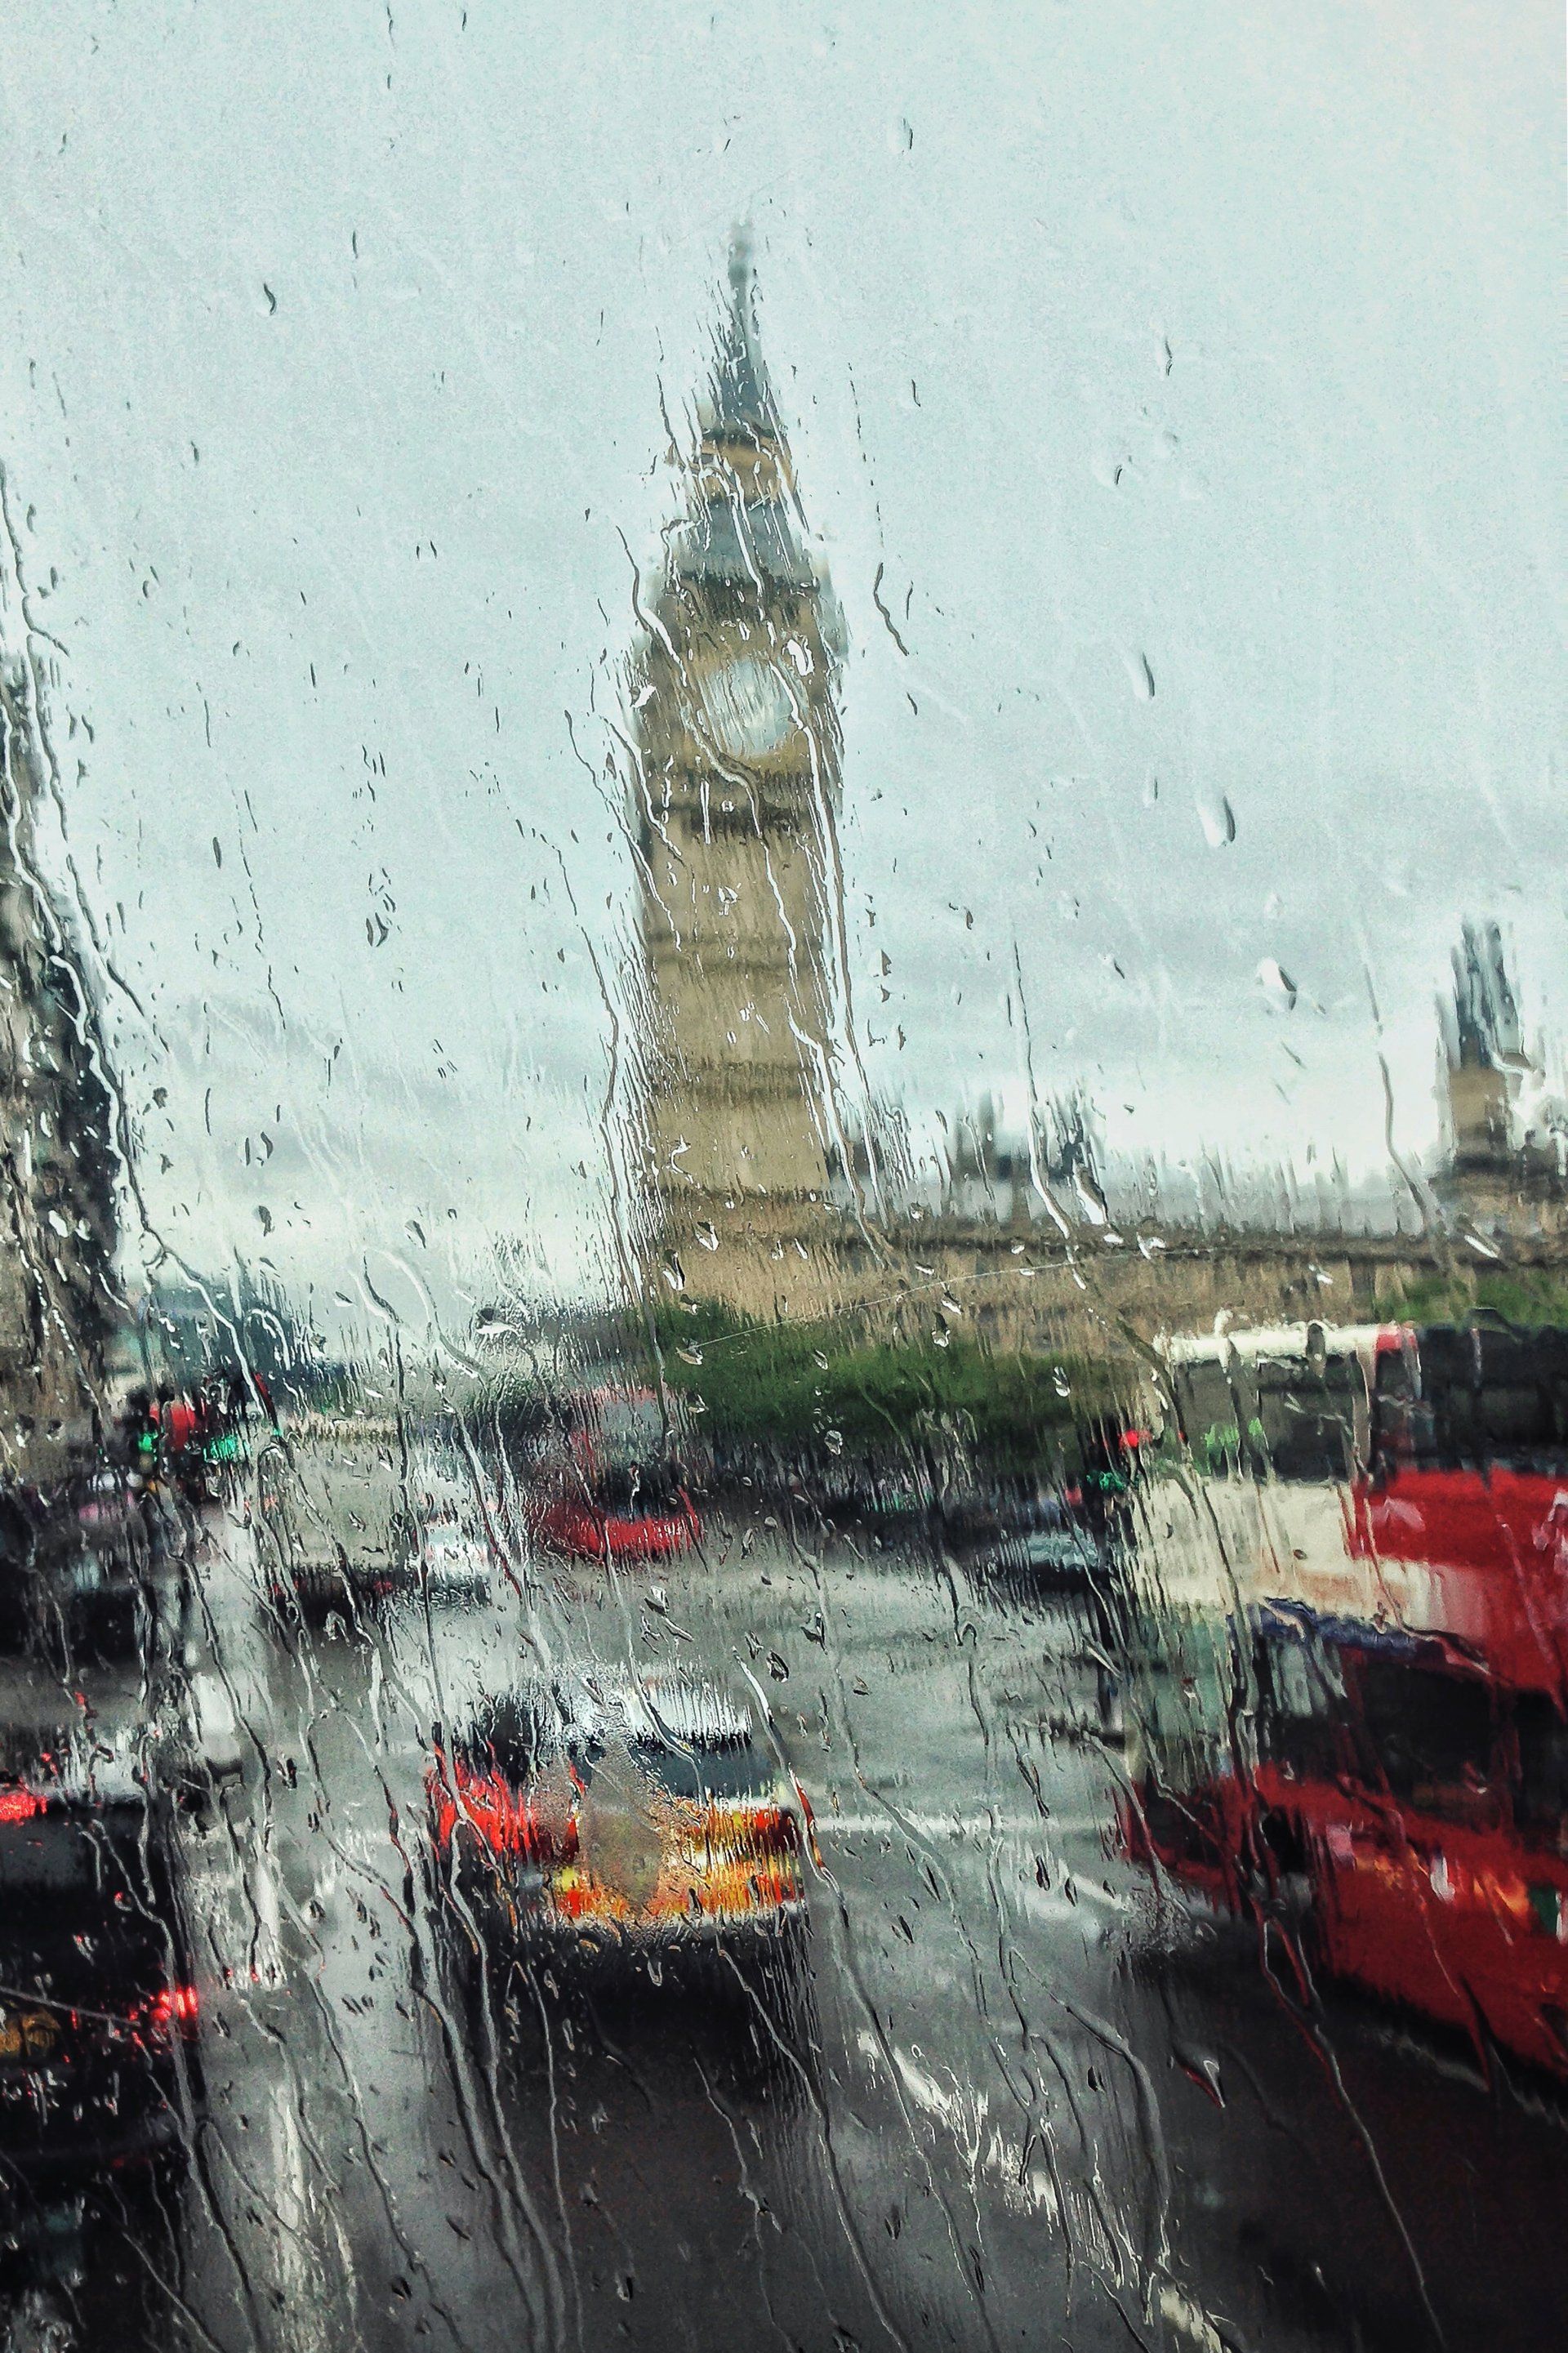 The big ben clock tower is visible through the rain drops on the window.